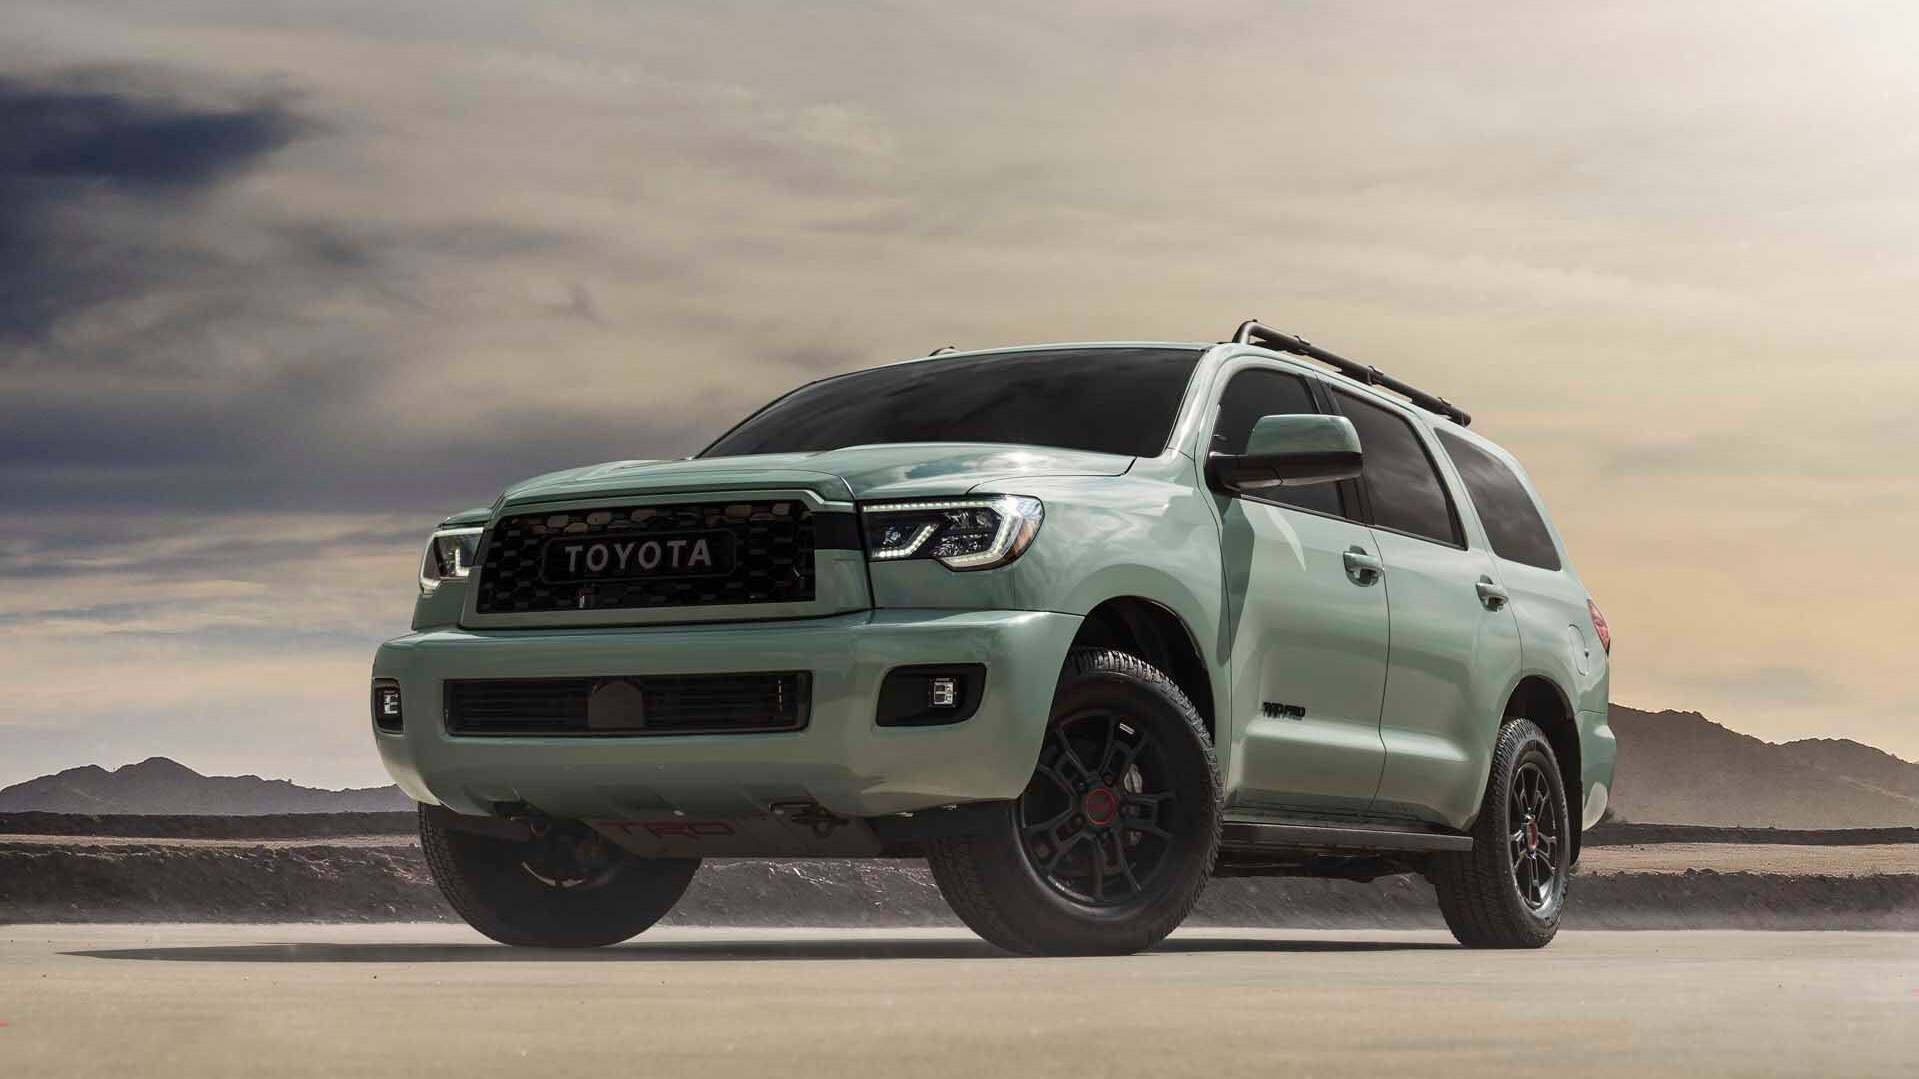 a 2021 toyota sequoia trd pro in Lunar rock in a pale desert showing off its wide, rugged stance. 